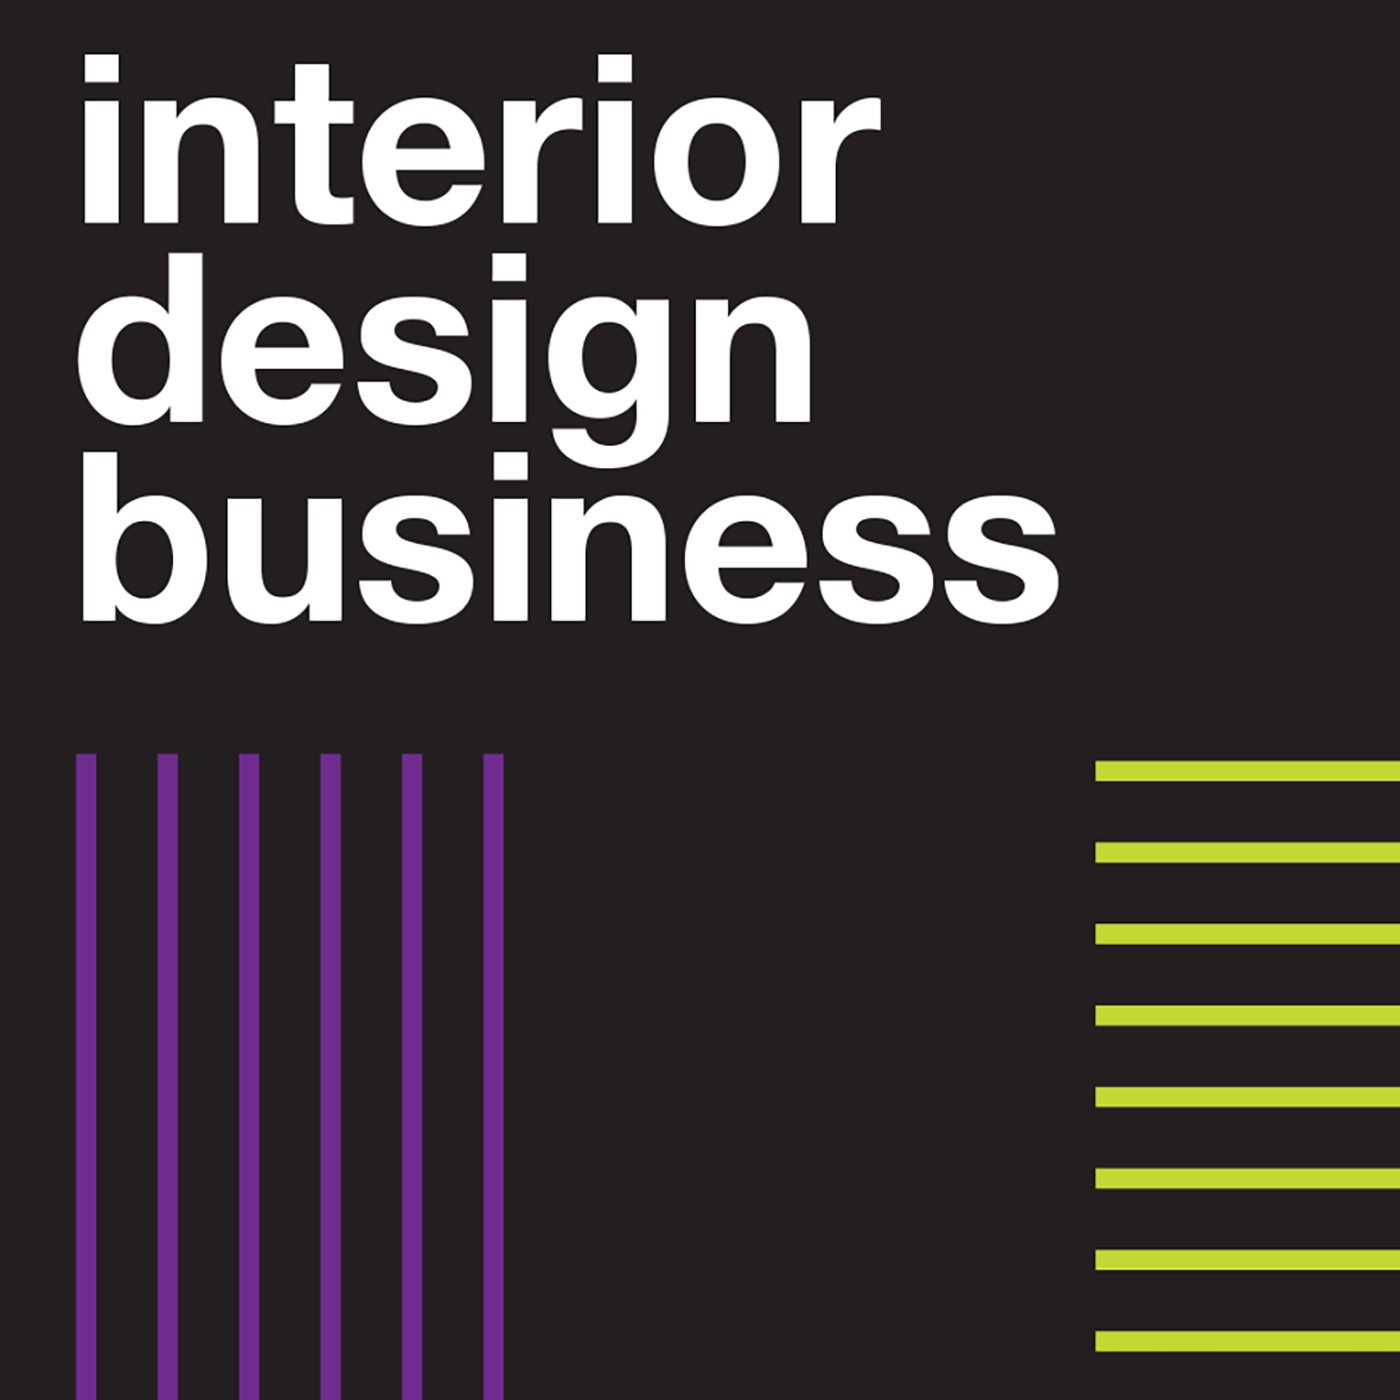 Career Changing To Interior Design